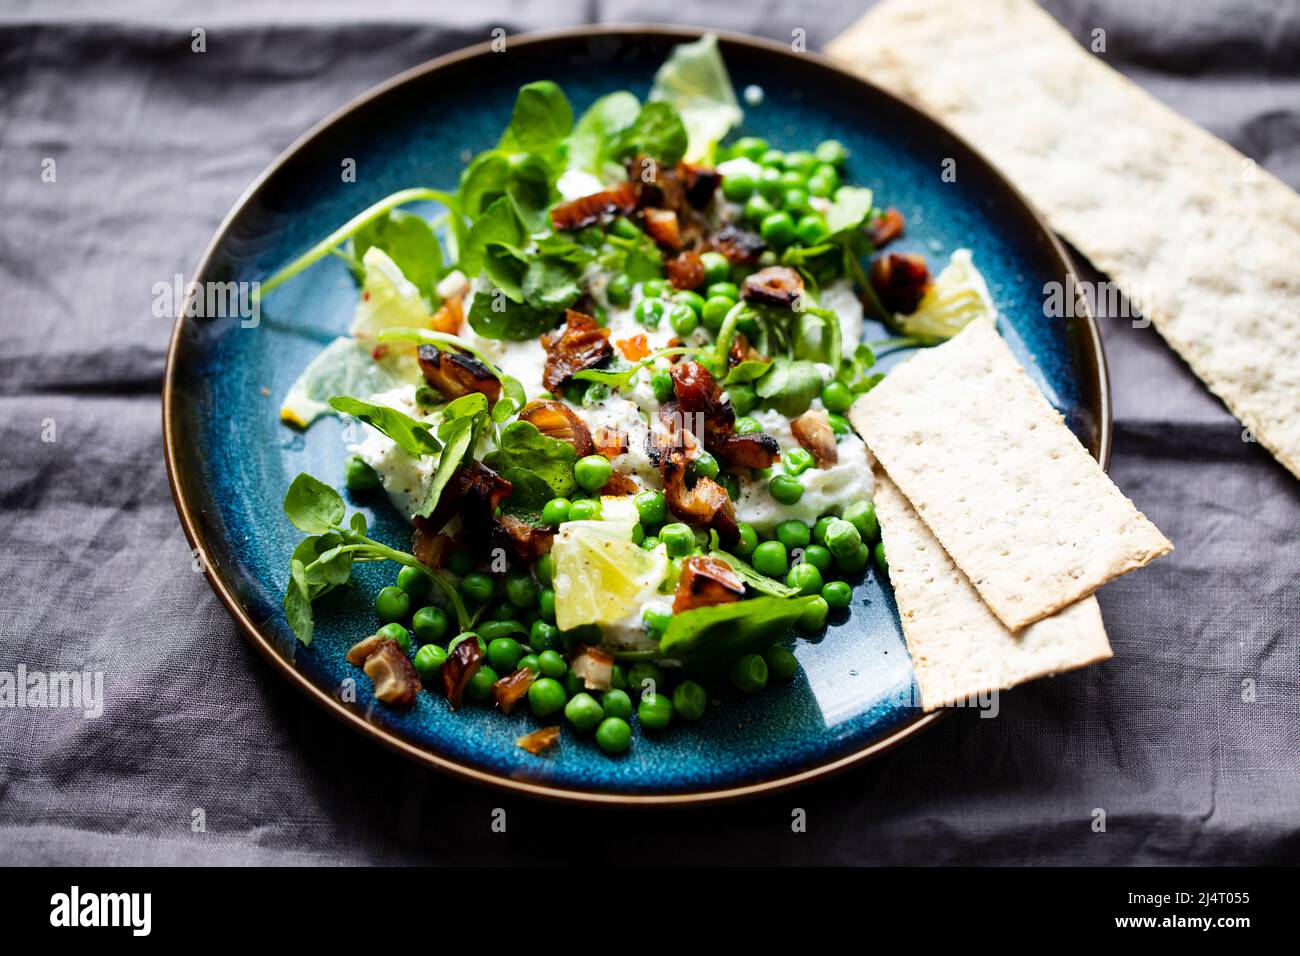 Ricotta cheese, green peas, watercress and dates salad Stock Photo